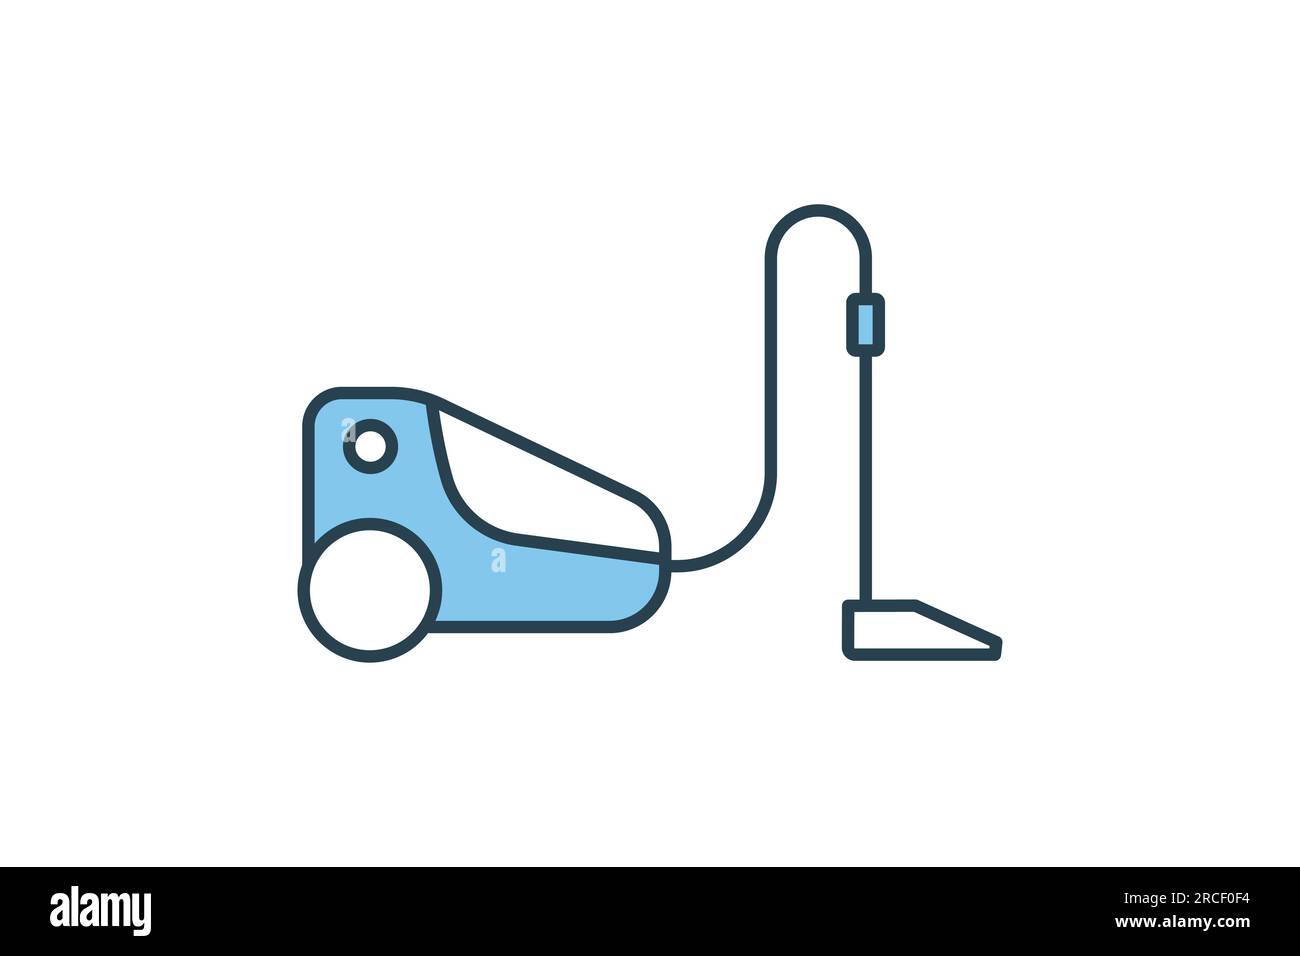 Vacuum cleaner icon. icon related to cleaning, electronic, household appliances. Flat line icon style design. Simple vector design editable Stock Vector